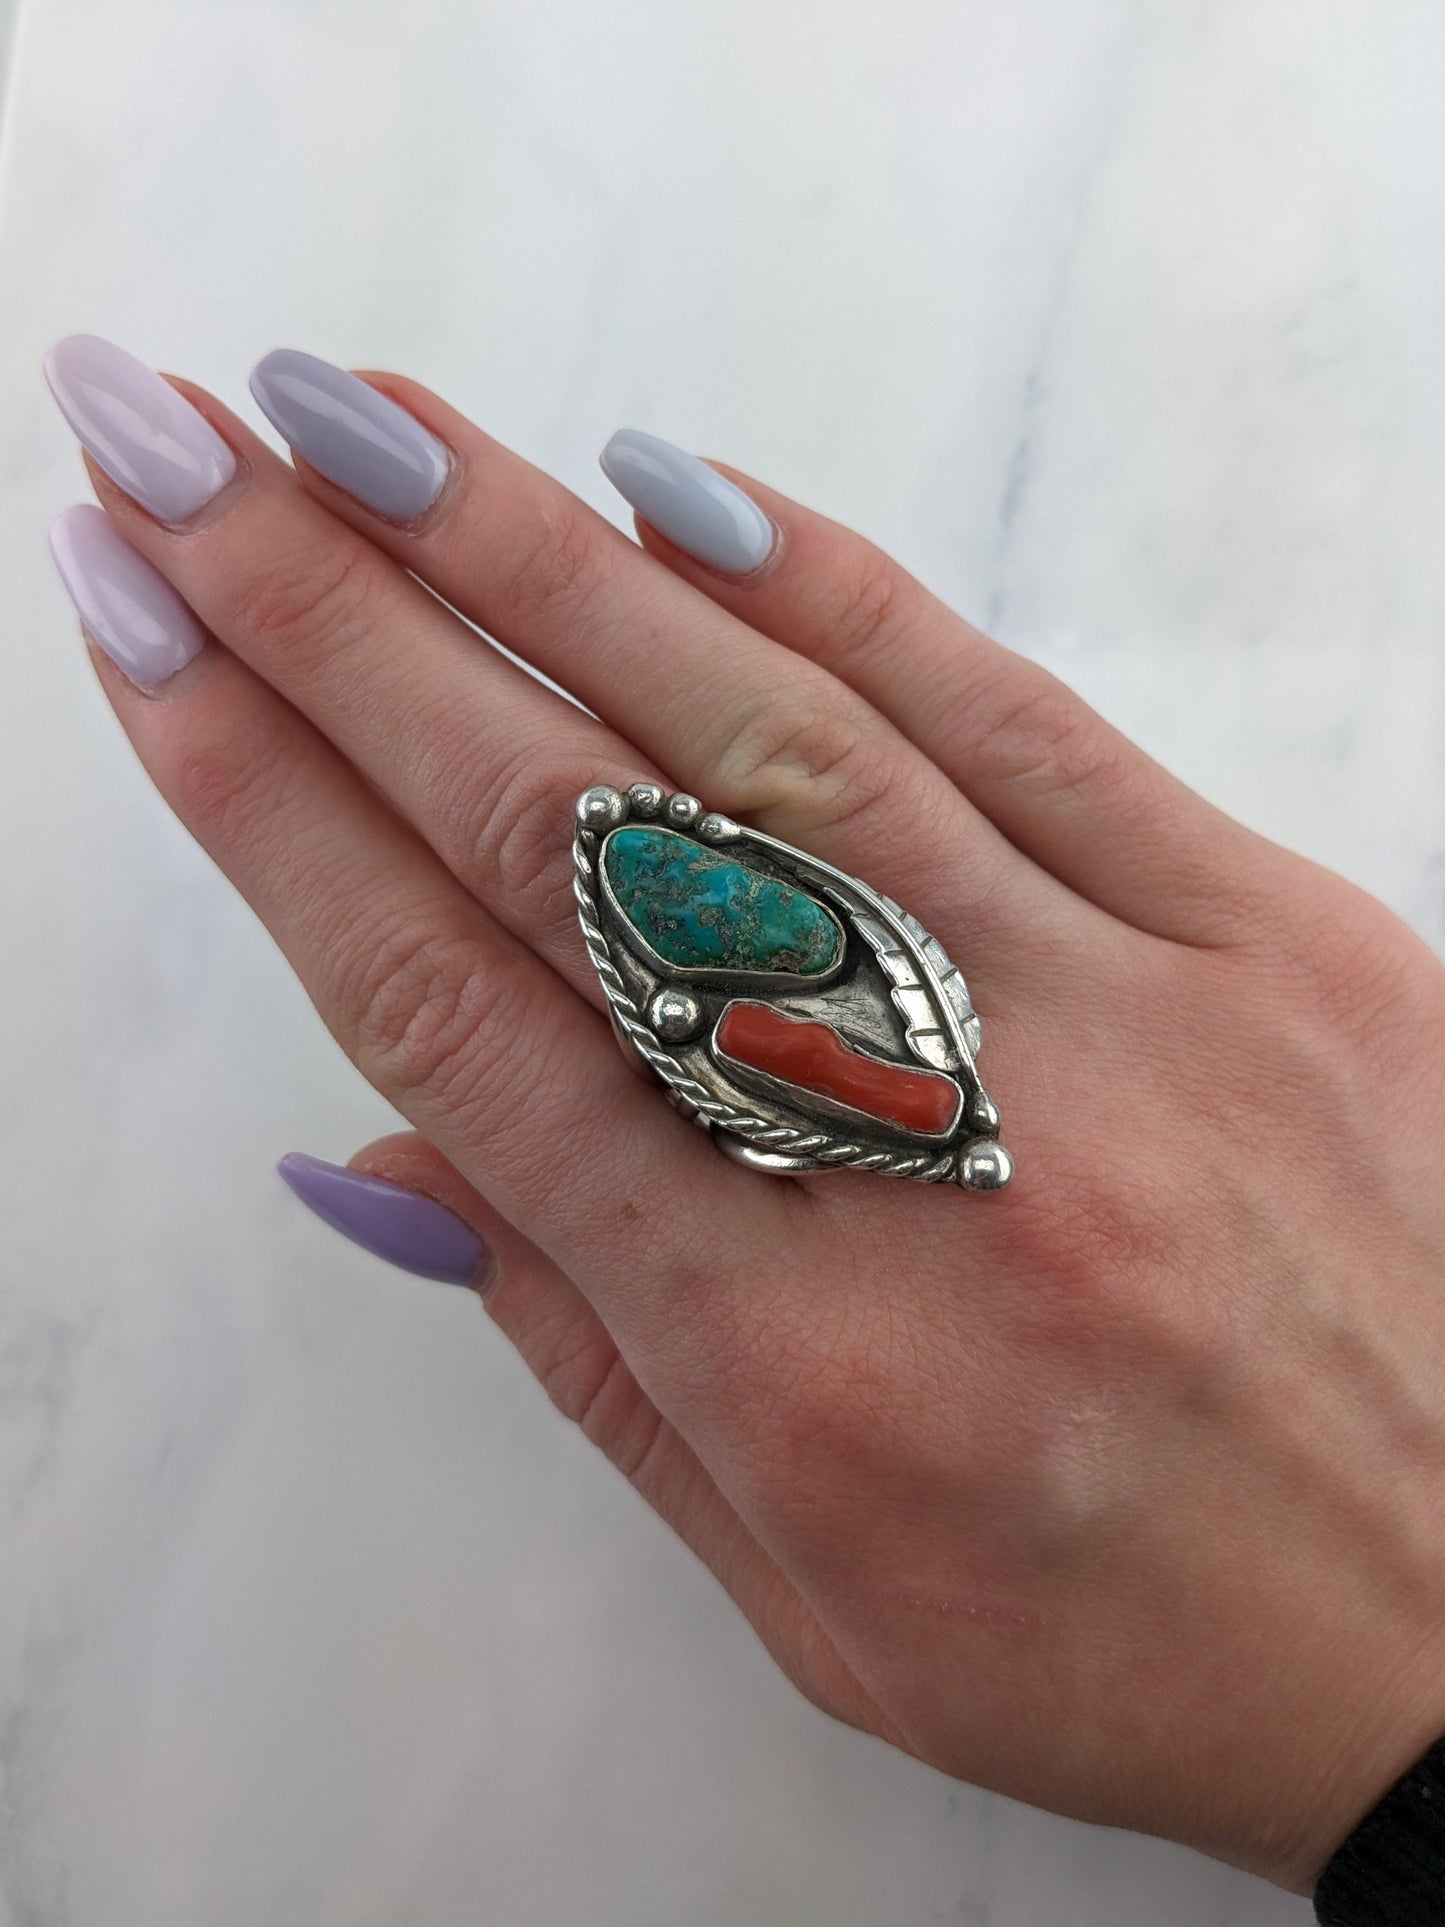 Vintage Native American Silver Ring Turquoise Coral Sterling Green Red Size 7